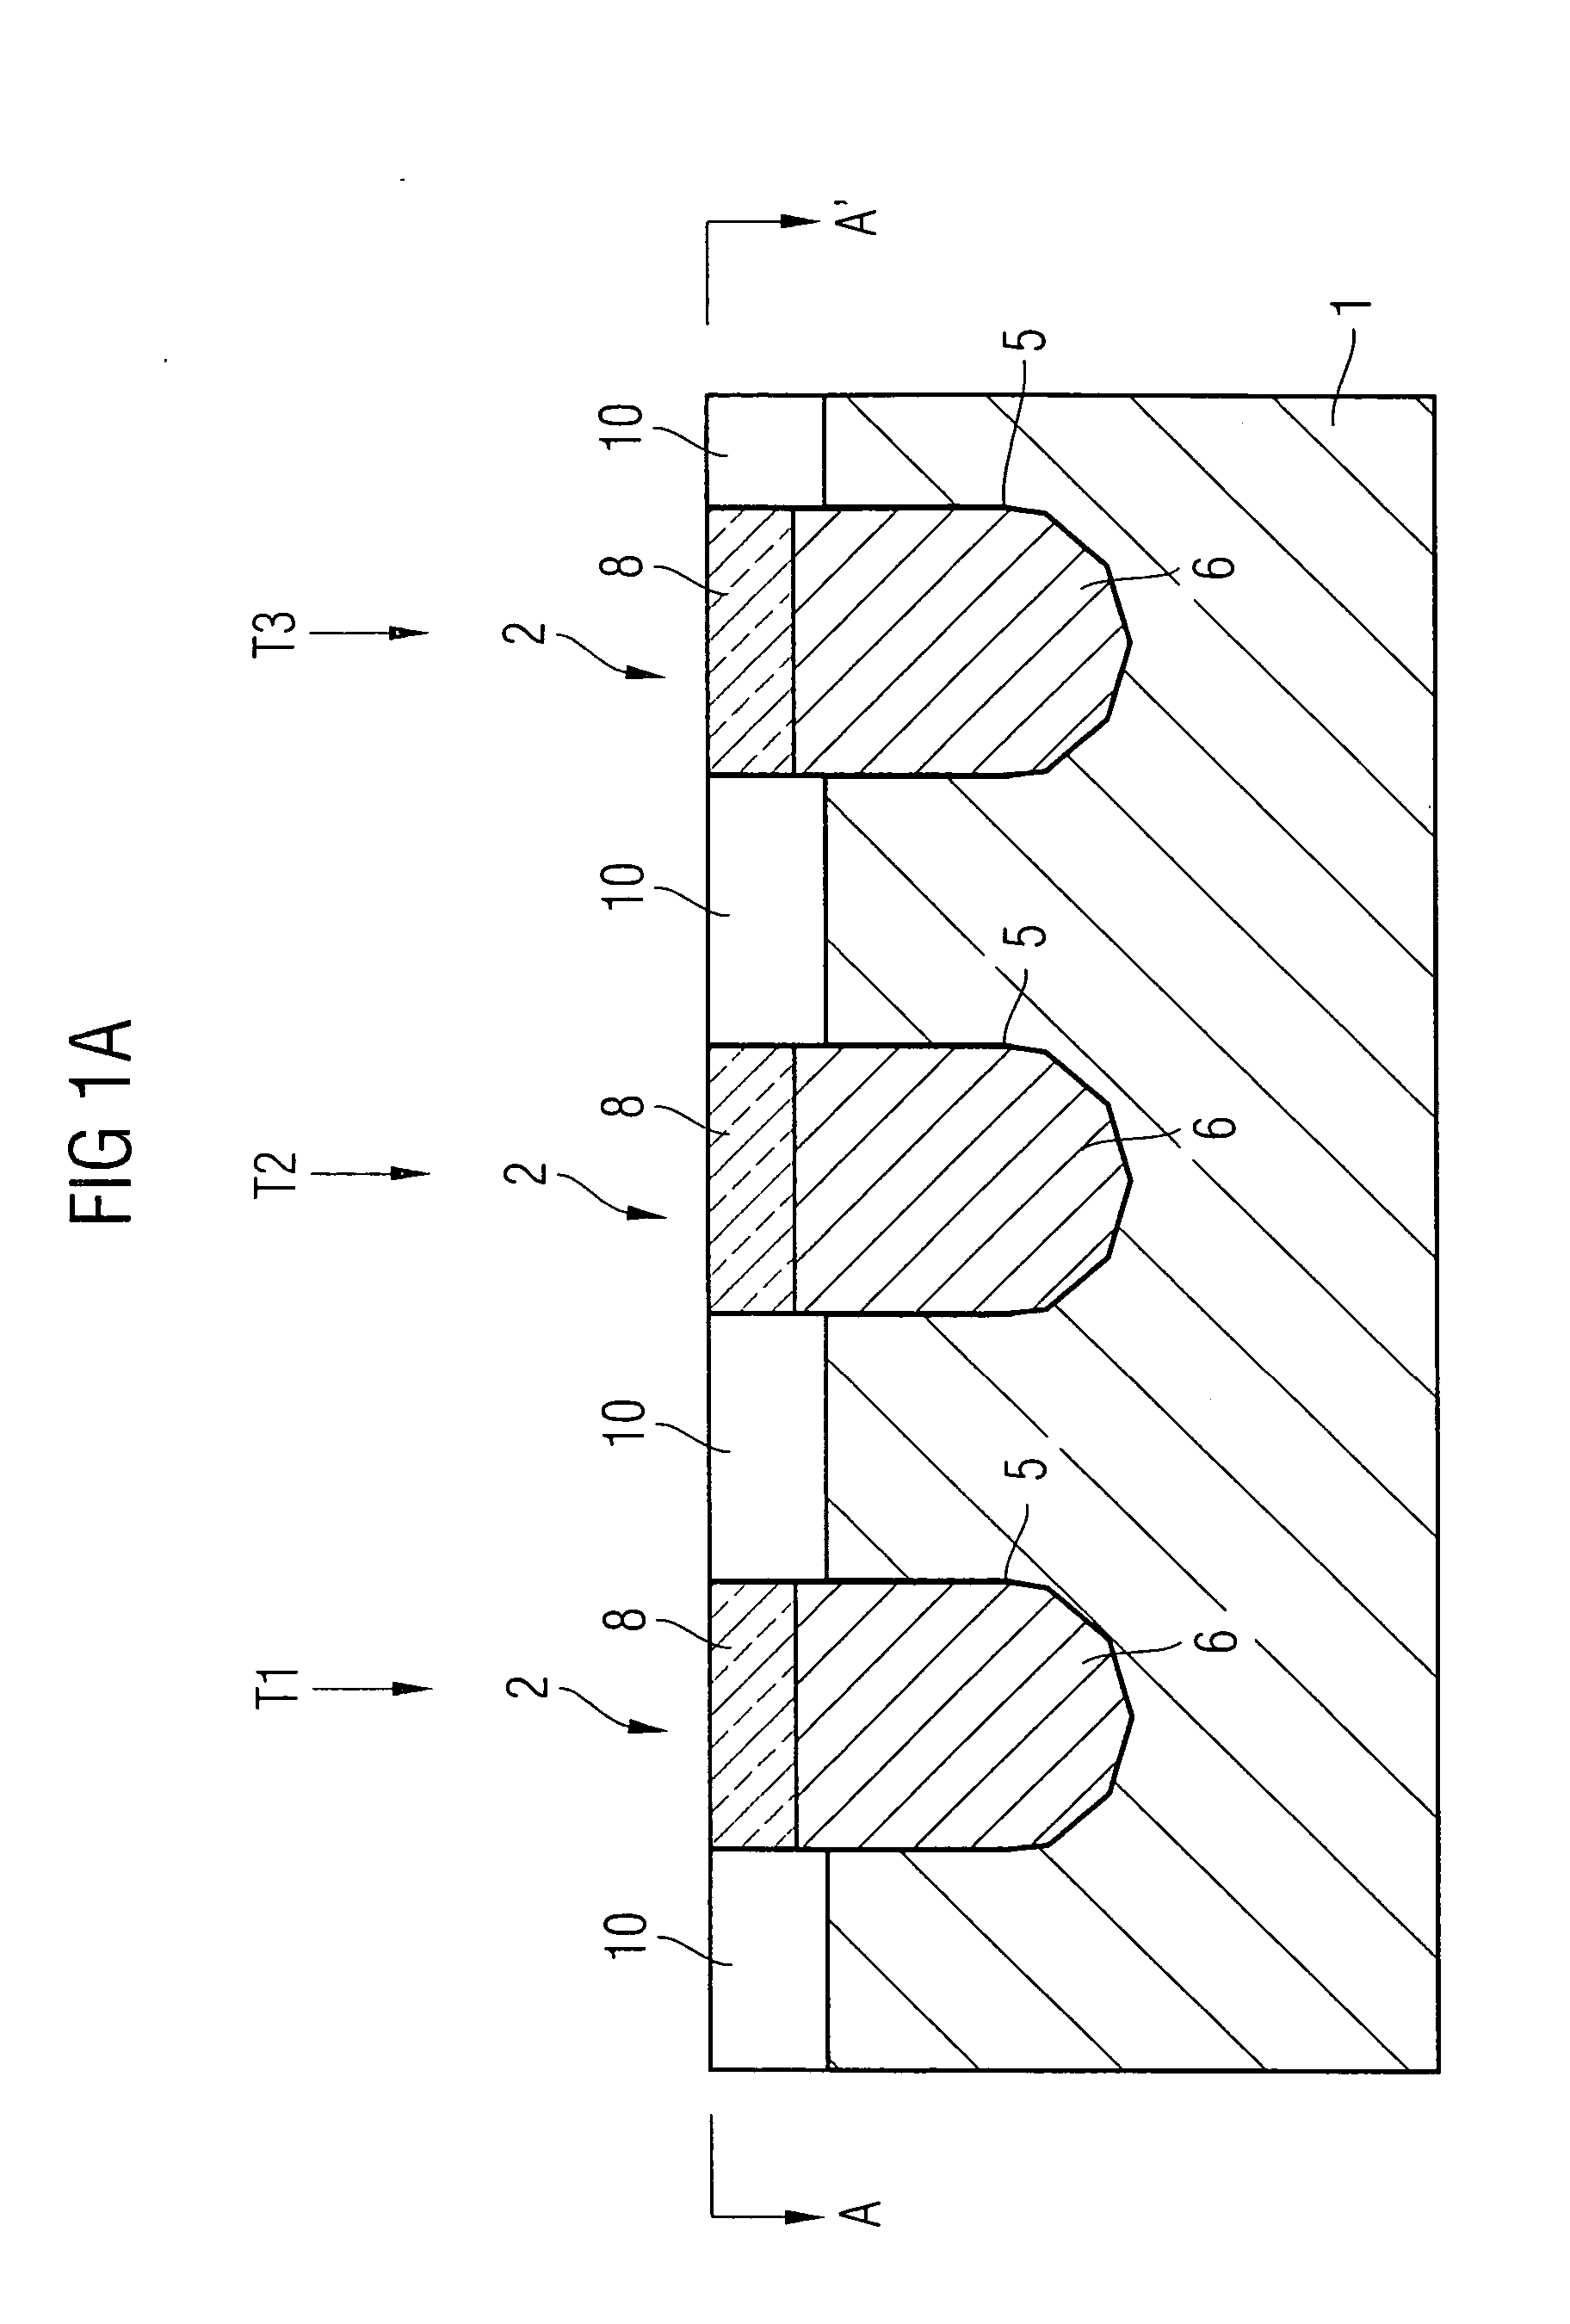 NROM semiconductor memory device and fabrication method